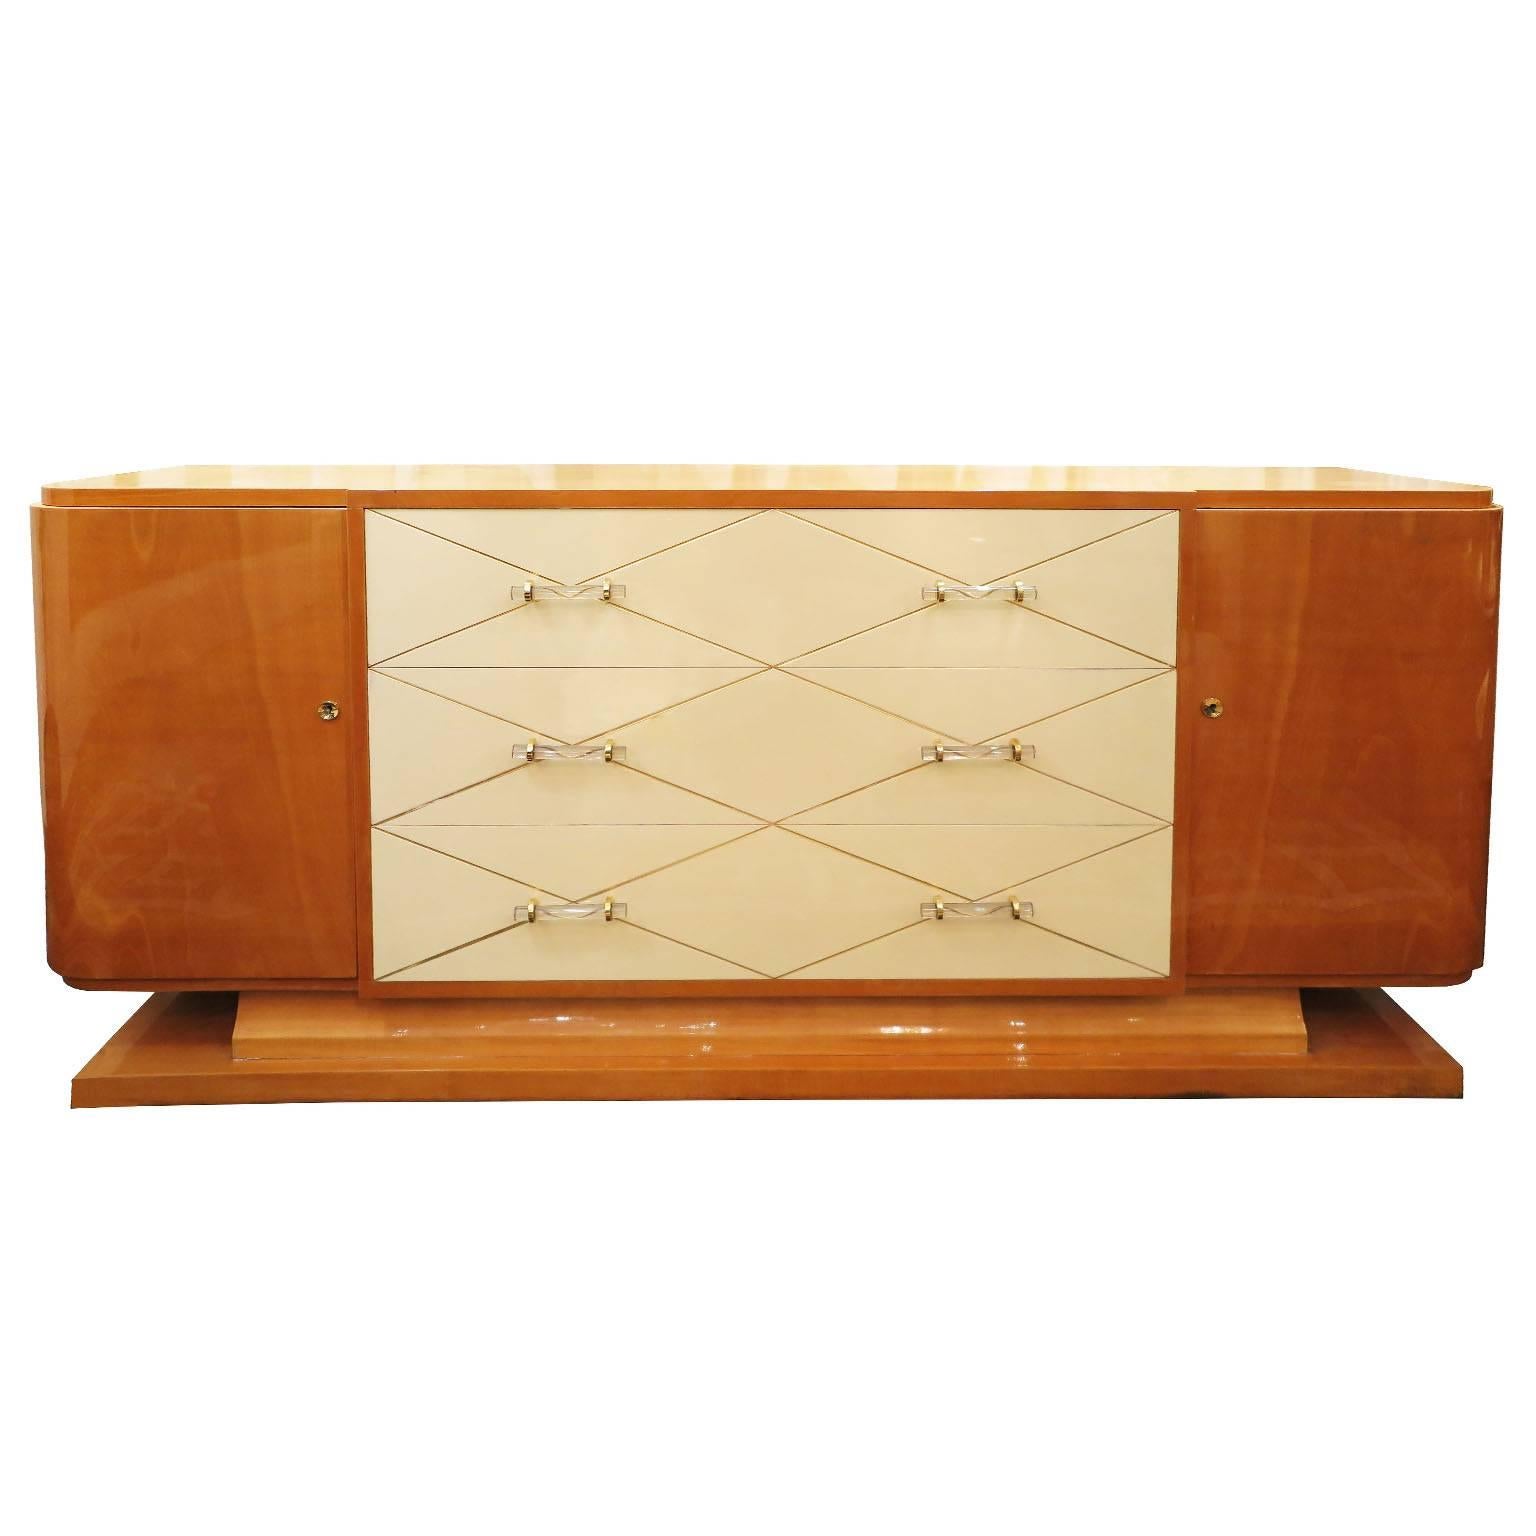 French Art Deco Maple and Lacquer Sideboard with Lucite Pulls